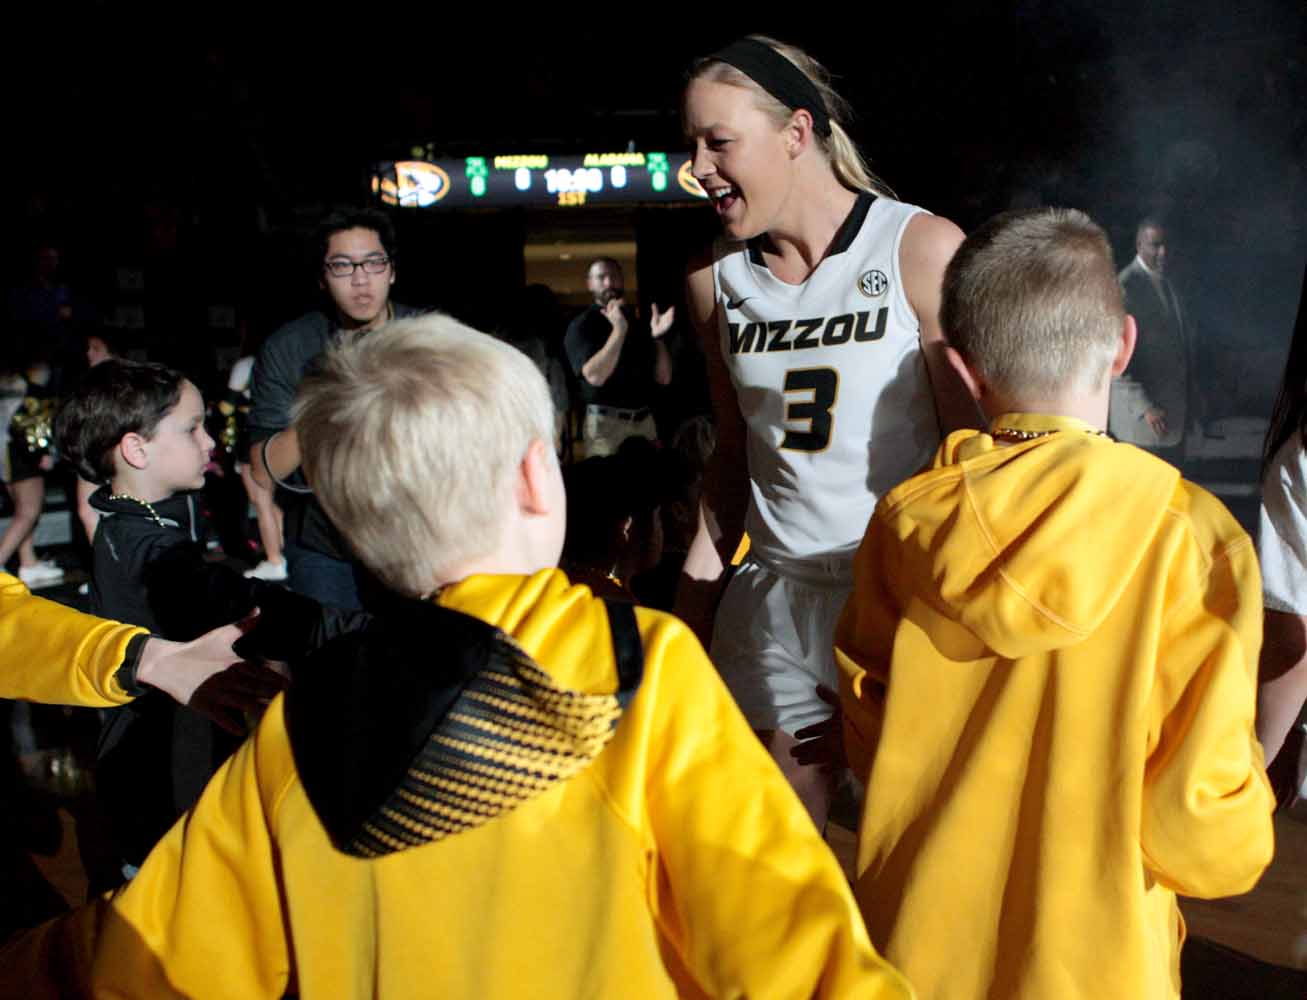 Sophie Cunningham (3) runs onto the court, greeting fans, after being called in Mizzou's starting lineup against Alabama Thursday evening, Feb. 11, 2016.